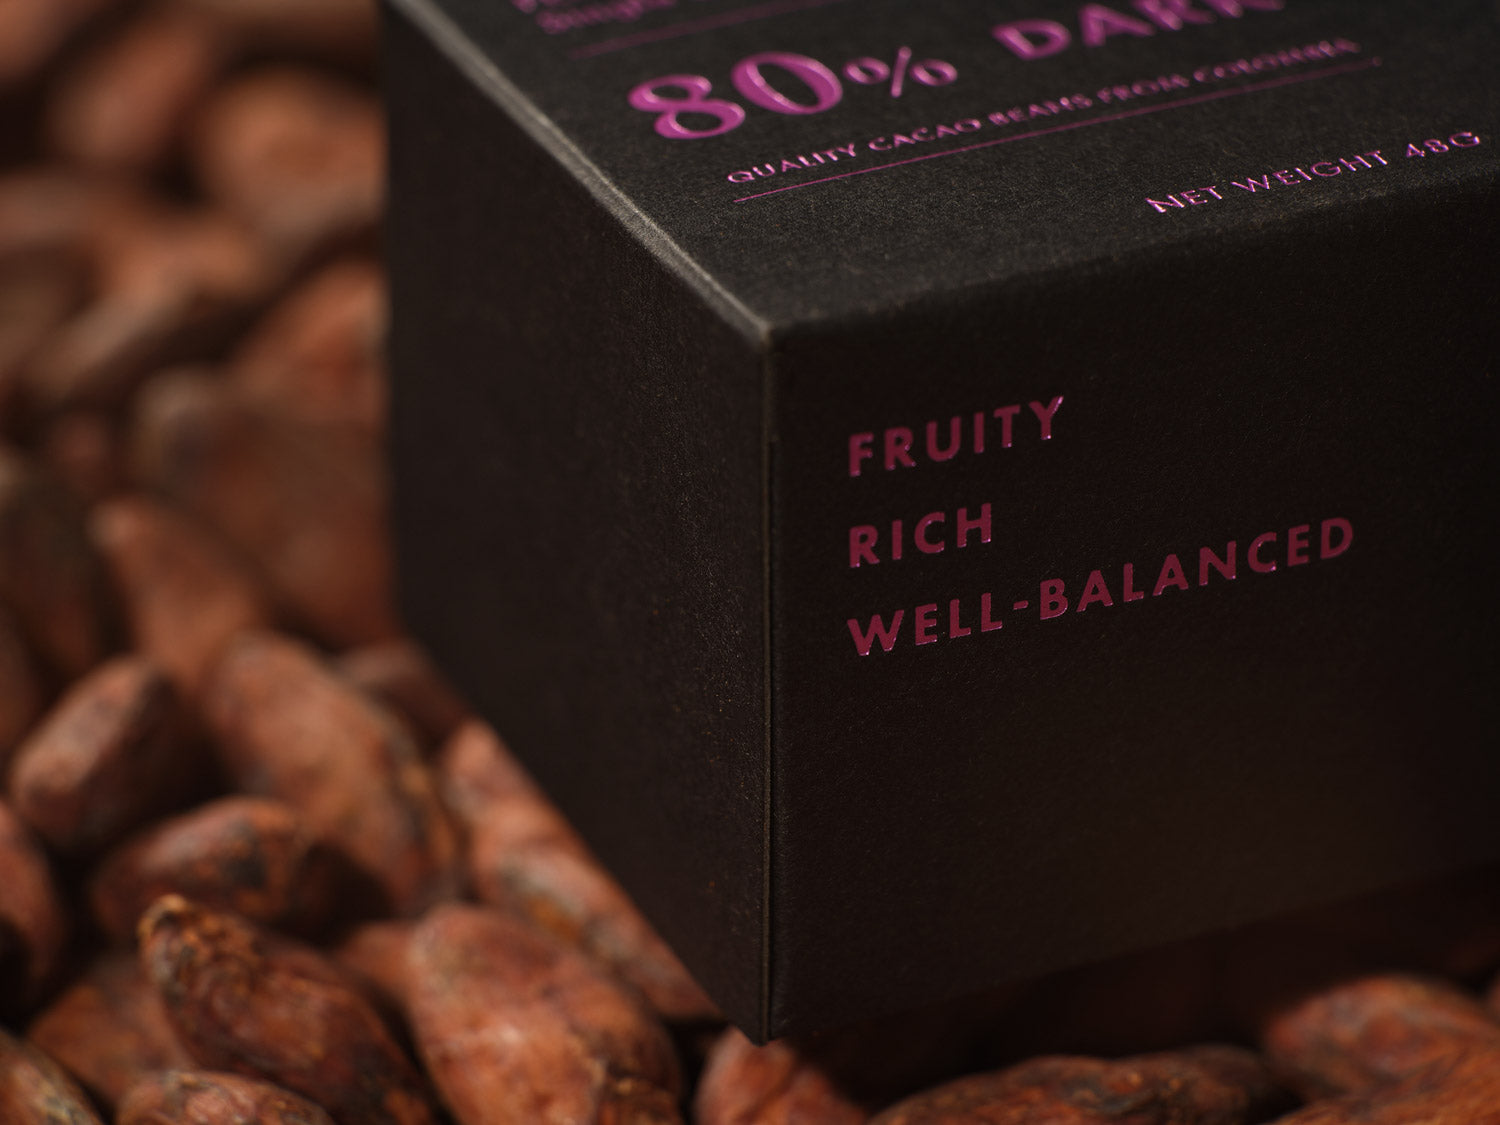 Colombia FEAR 5 80% Dark Chocolate